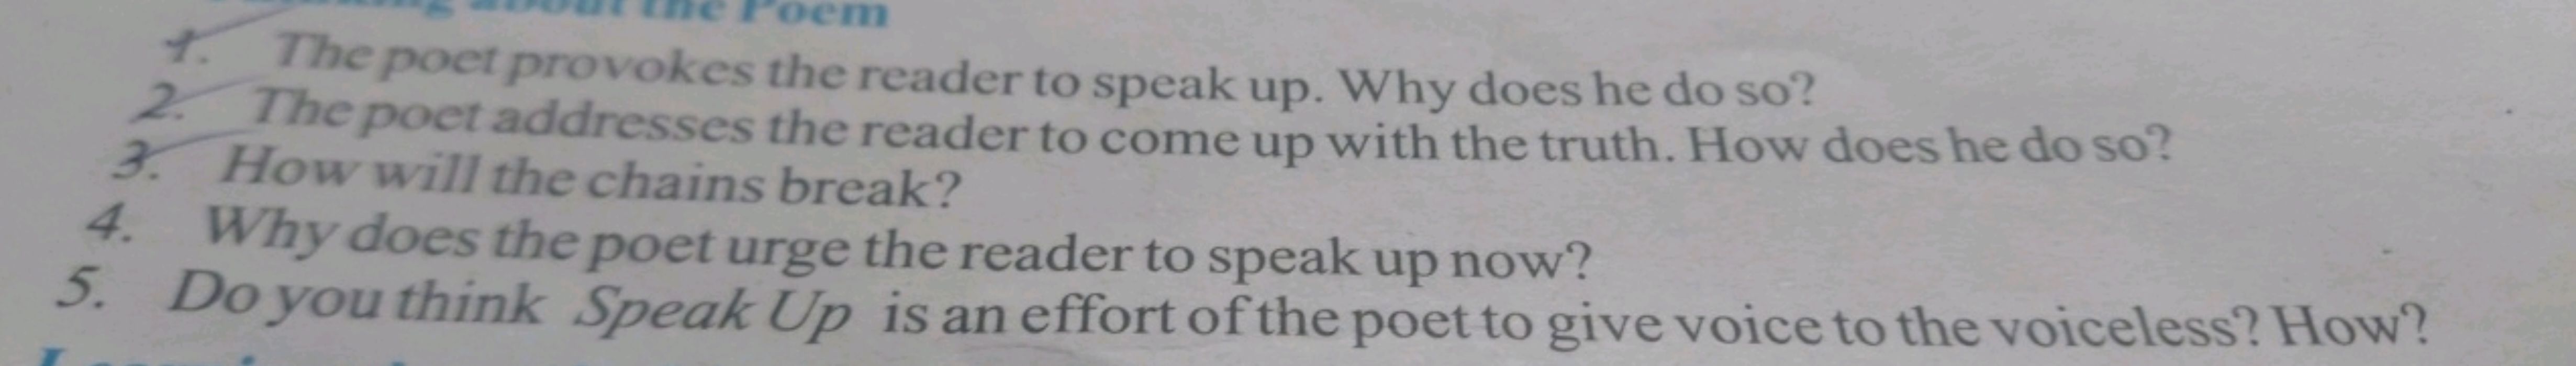 1. The poet provokes the reader to speak up. Why does he do so?